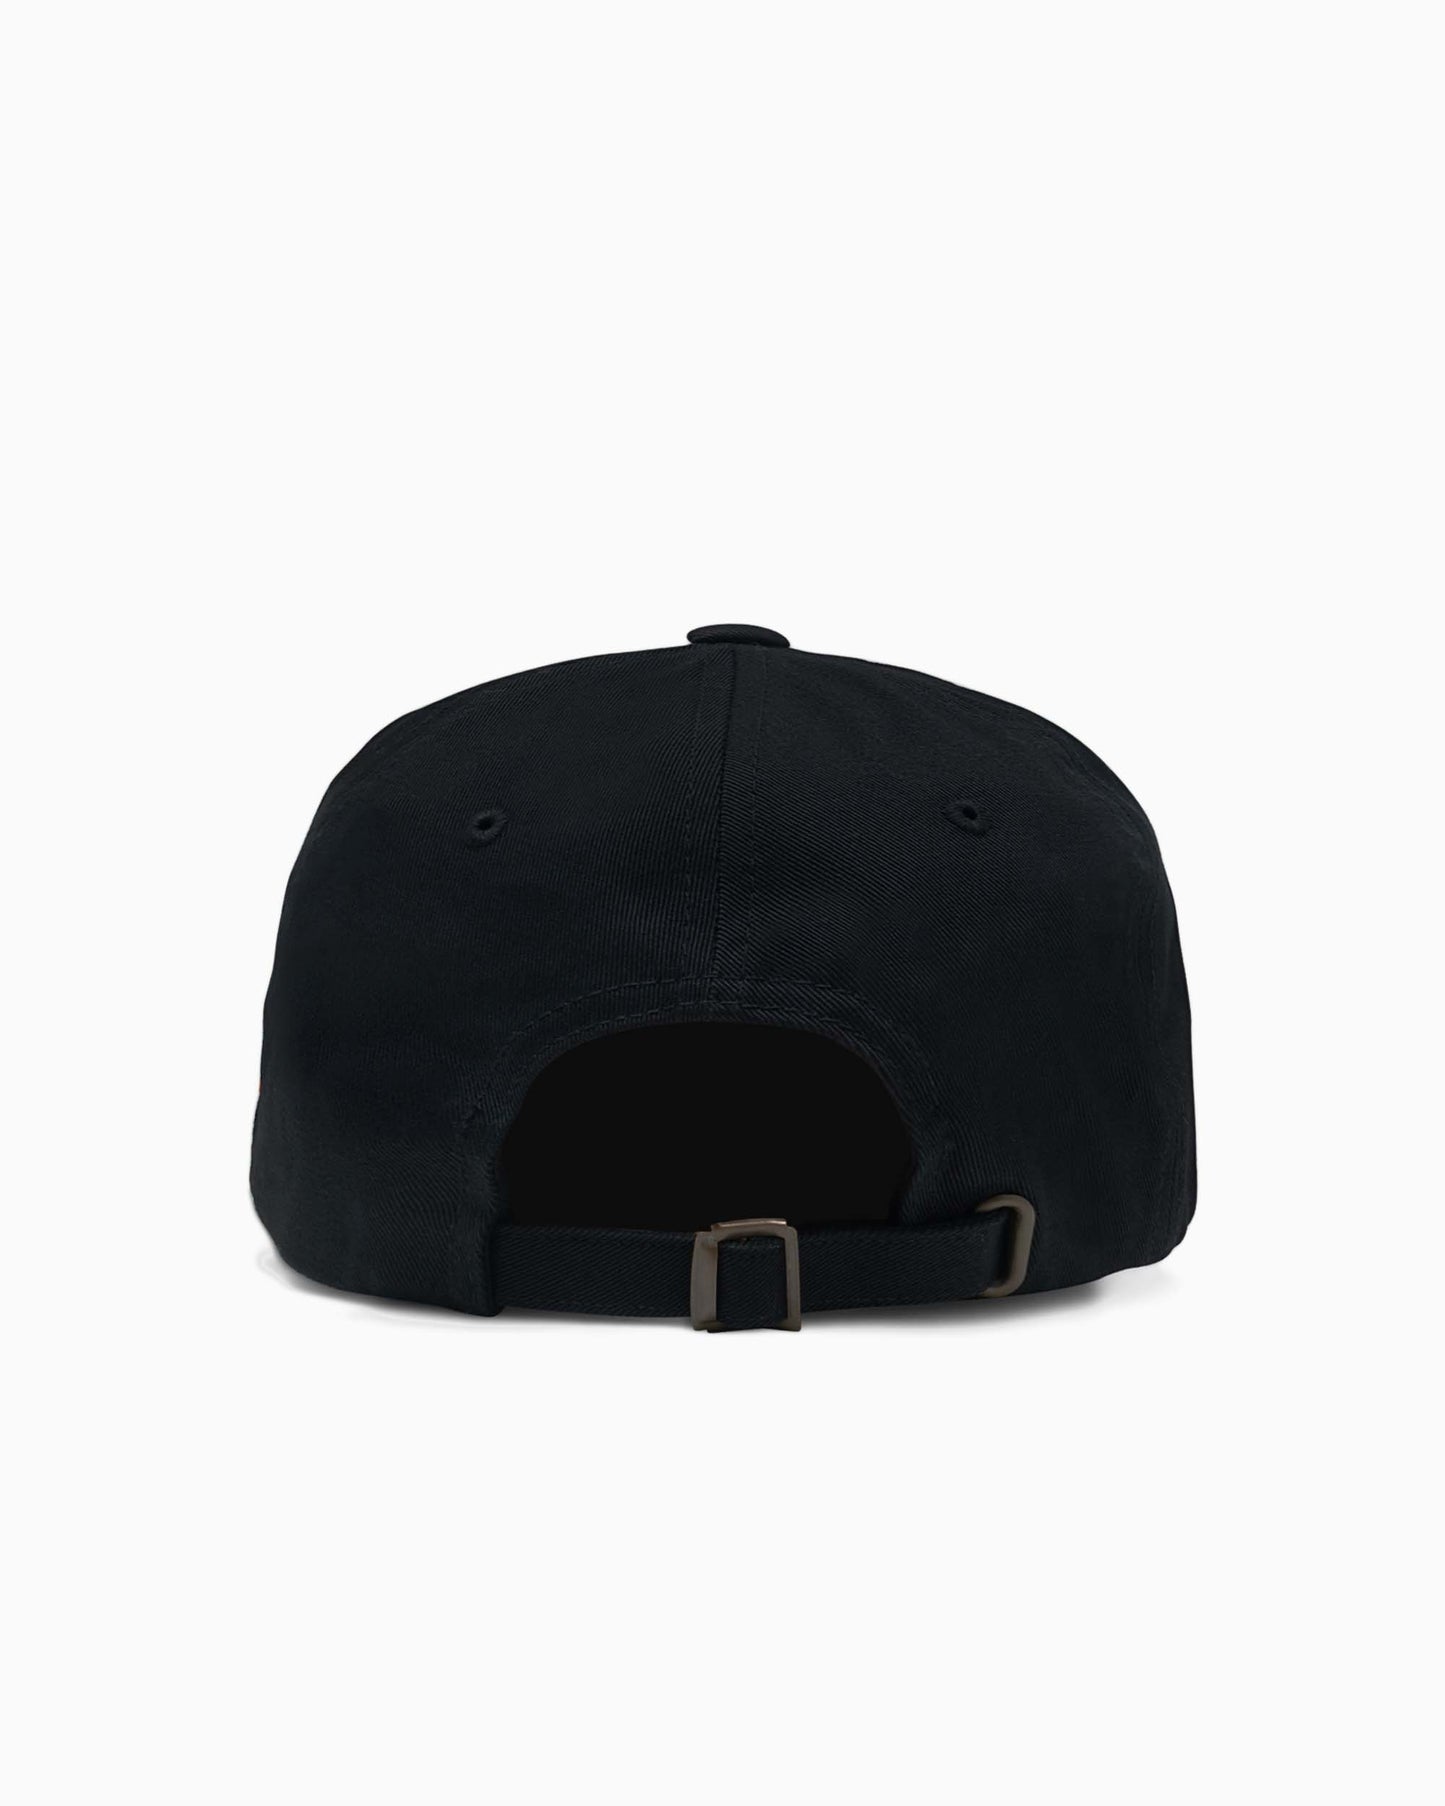 black back of hat with buckle closure 